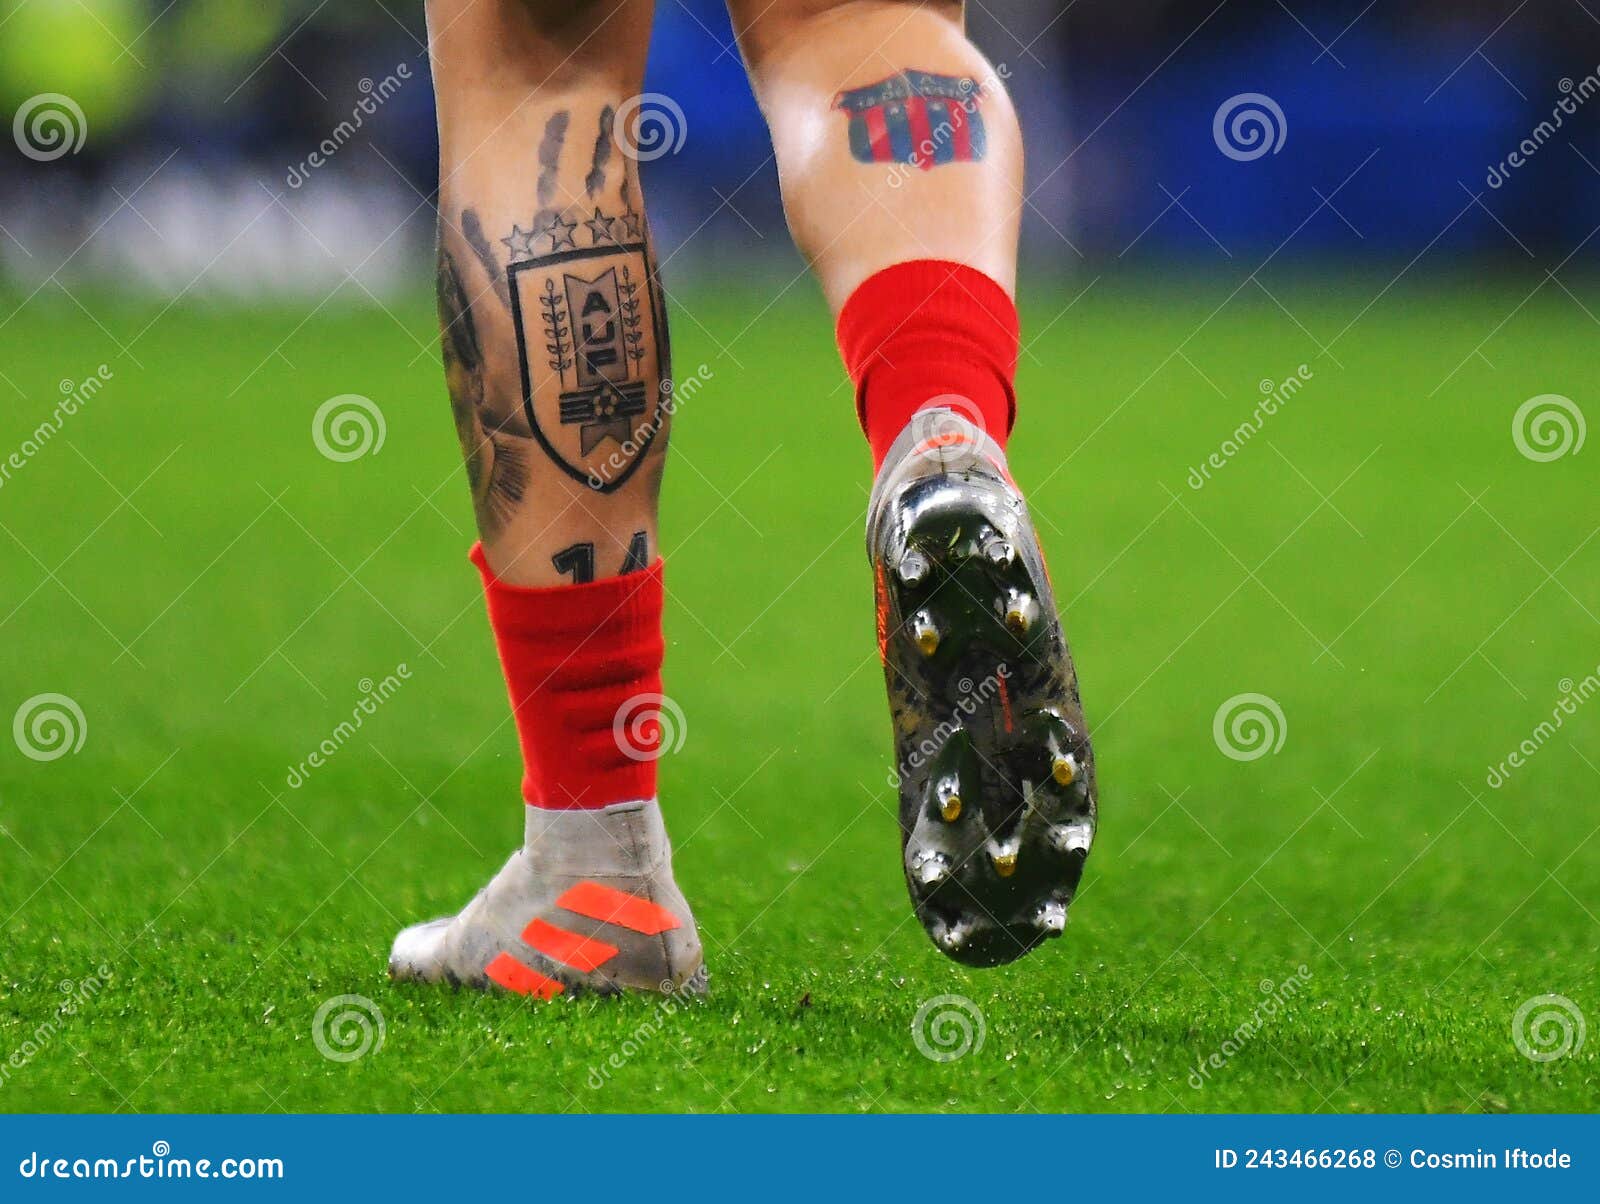 Arsenal star Hector Bellerin shows off giant snake tattoo on leg during  Real Madrid clash – The Sun | The Sun